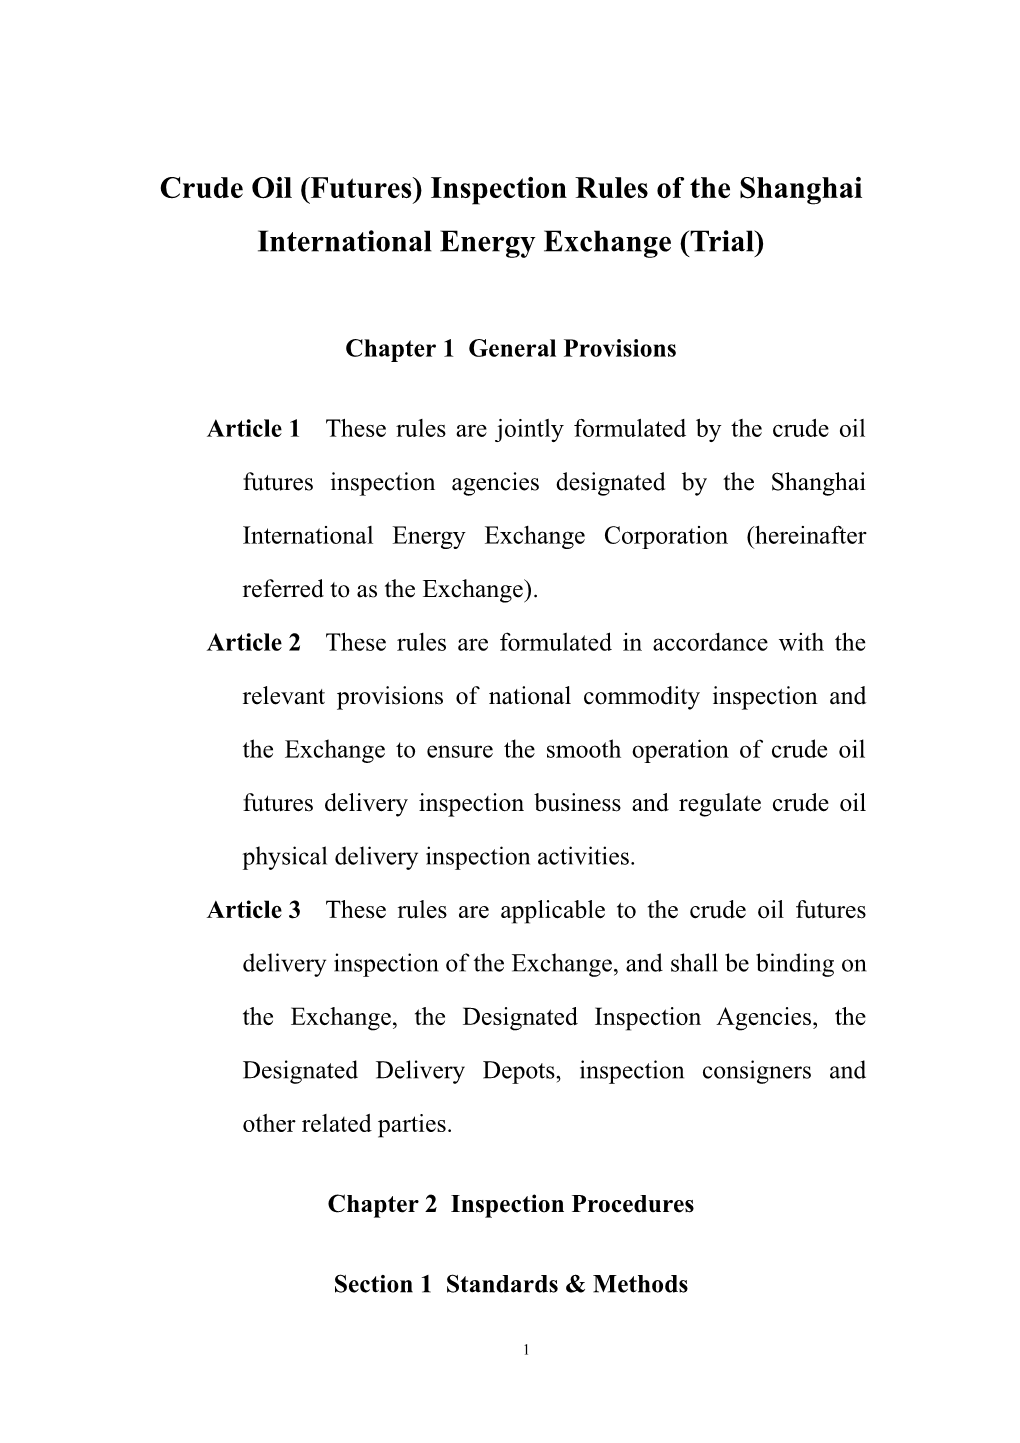 Crude Oil (Futures) Inspection Rules of Theshanghai International Energy Exchange (Trial)